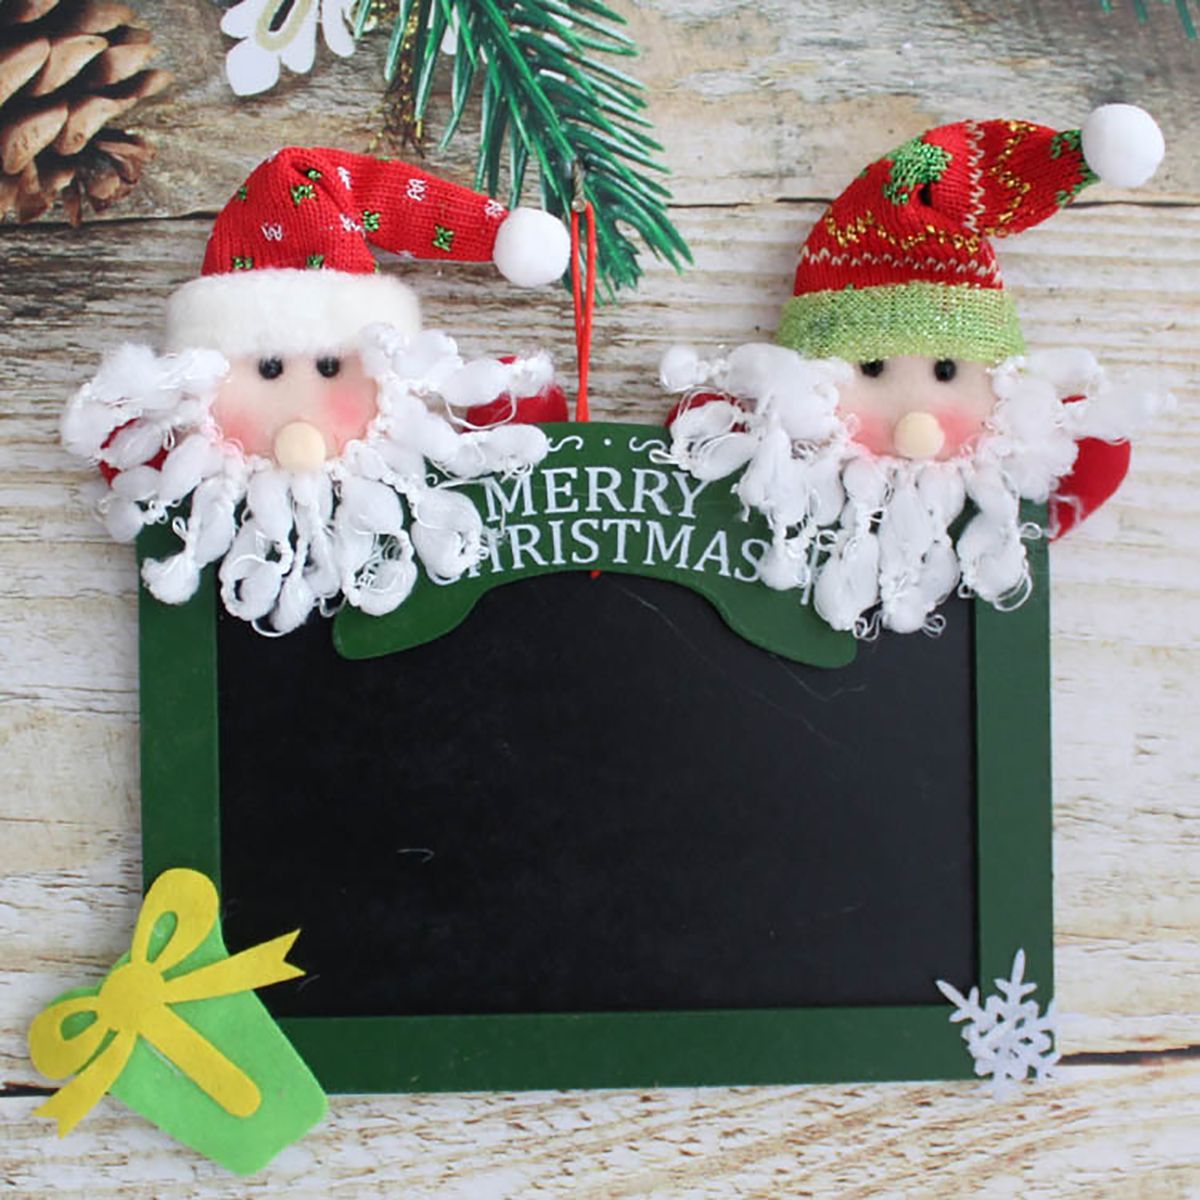 Merry-Christmas-Hanging-Sign-Wooden-Square-Blackboard-Wall-Door-Decoration-Hanging-Tags-for-DIY-Xmas-1904791